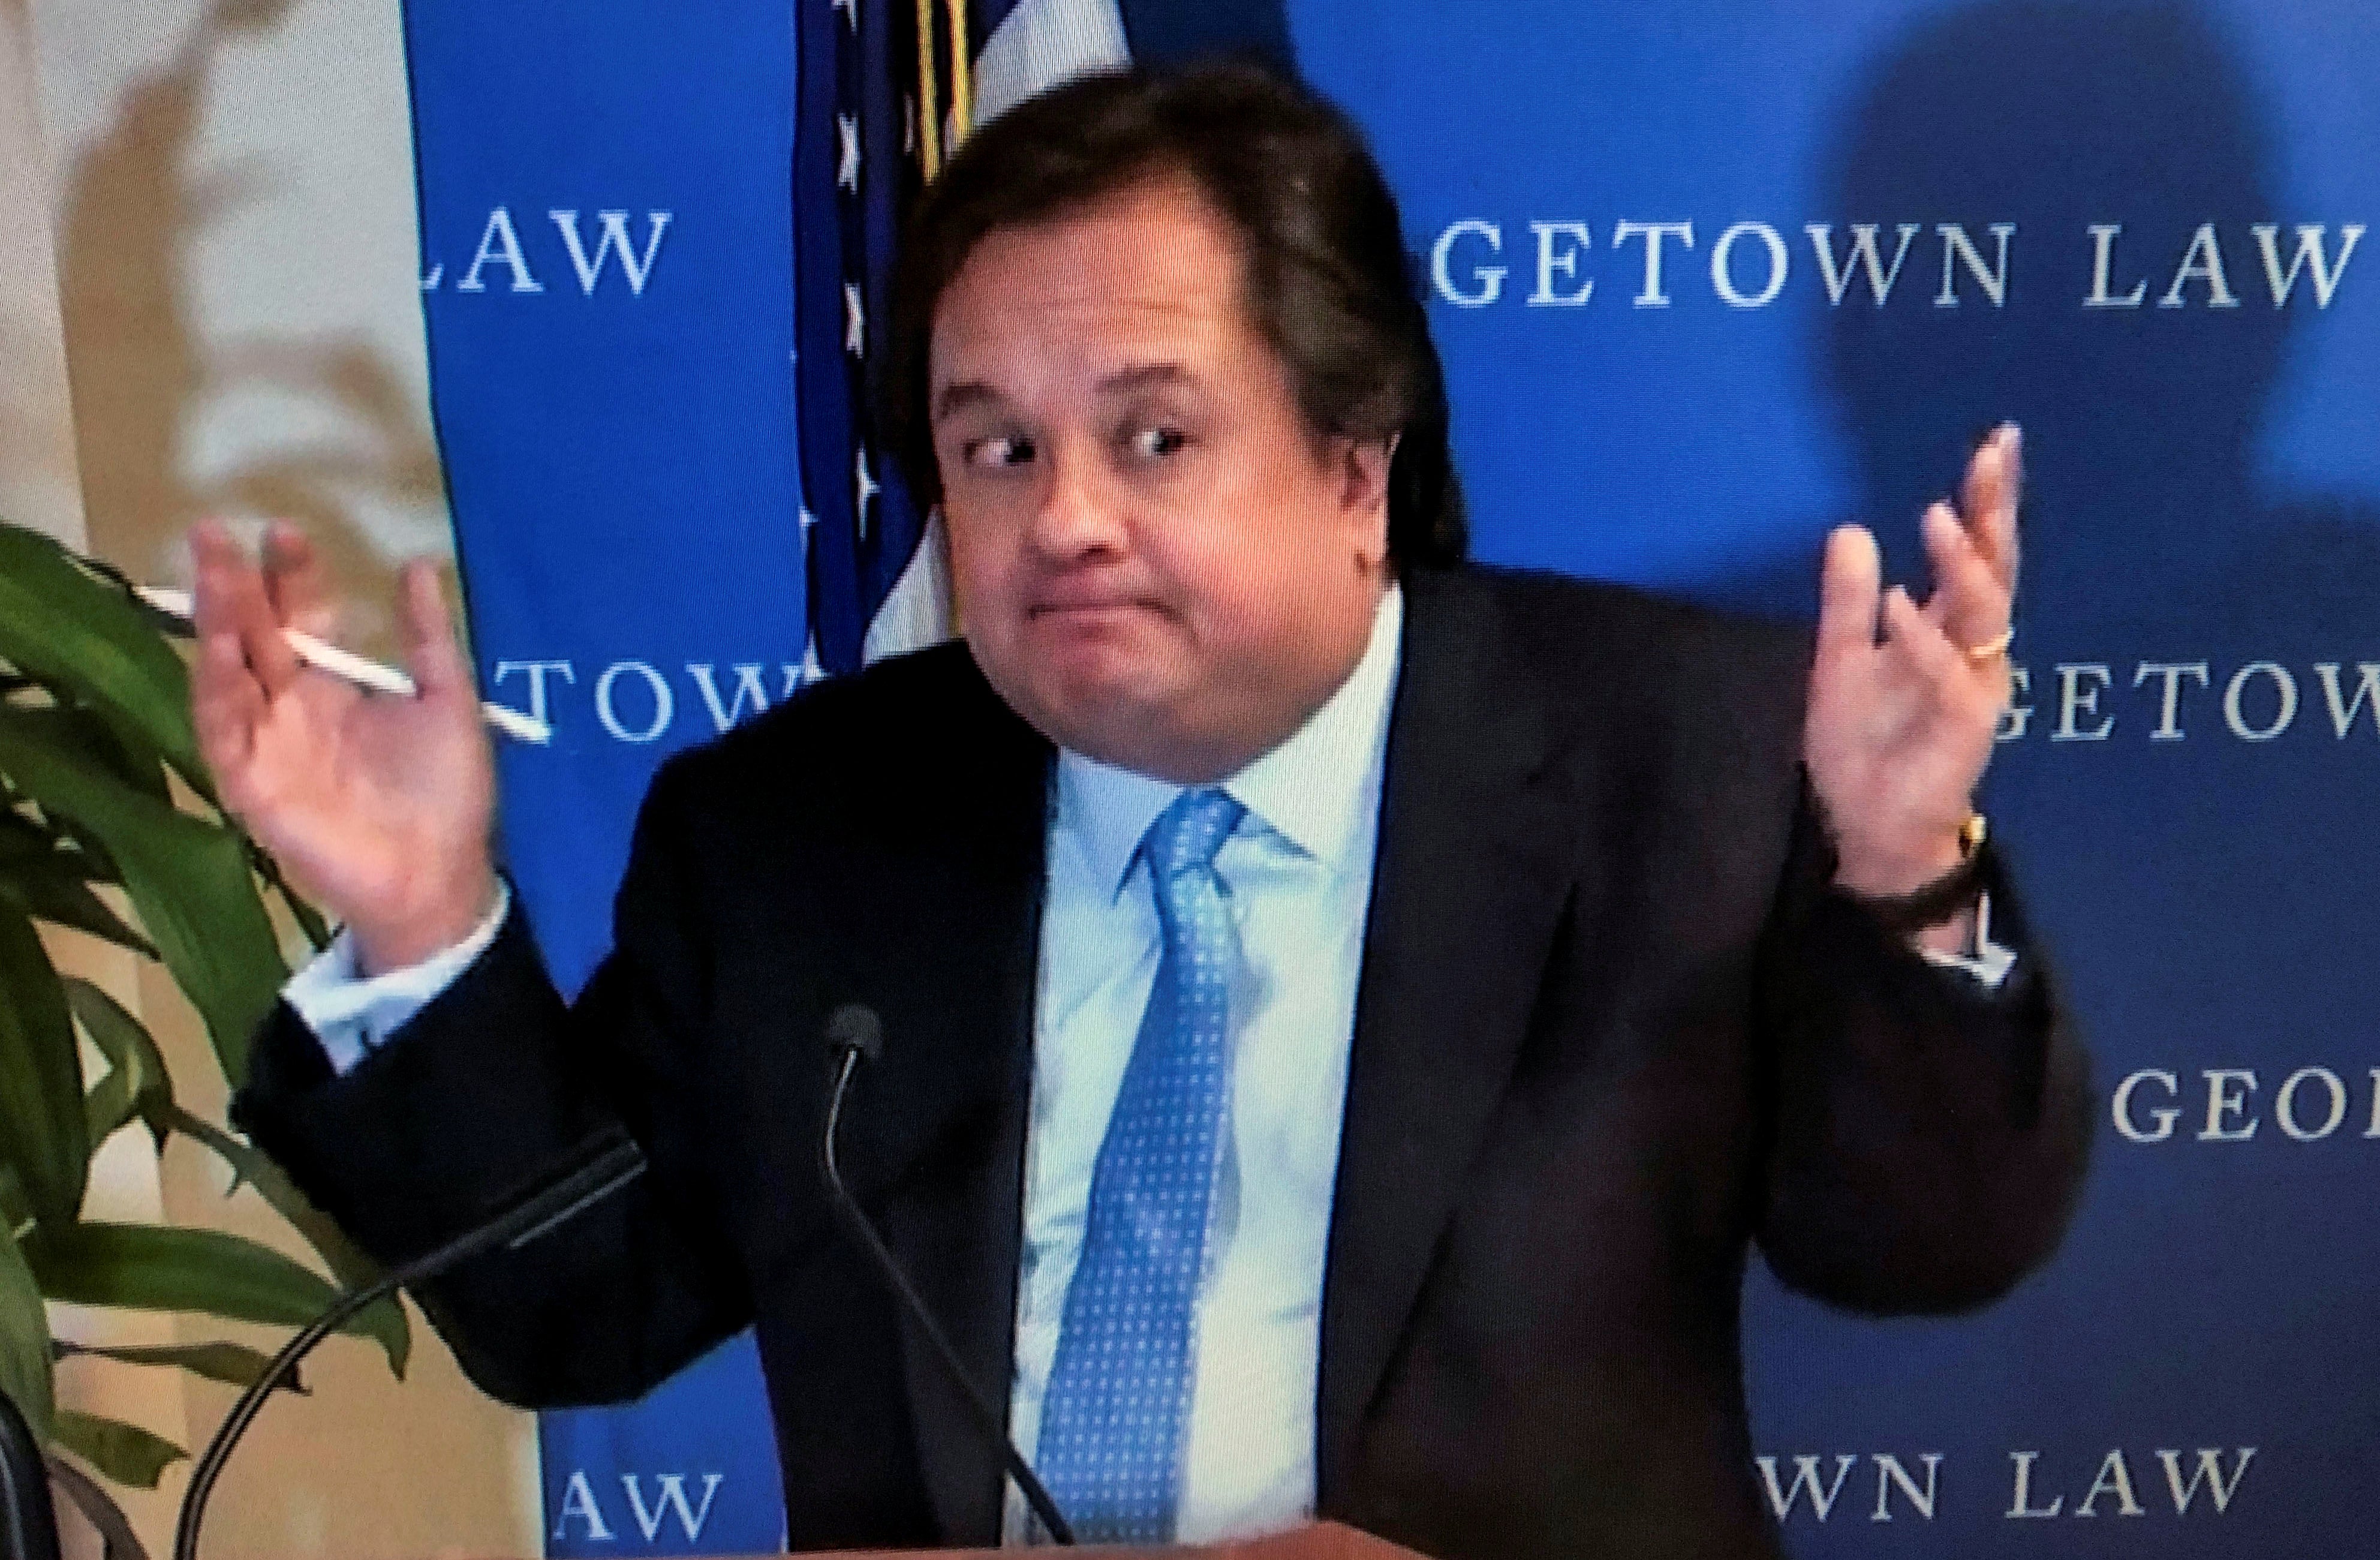 George Conway speaking at Georgetown Law School in March 2019